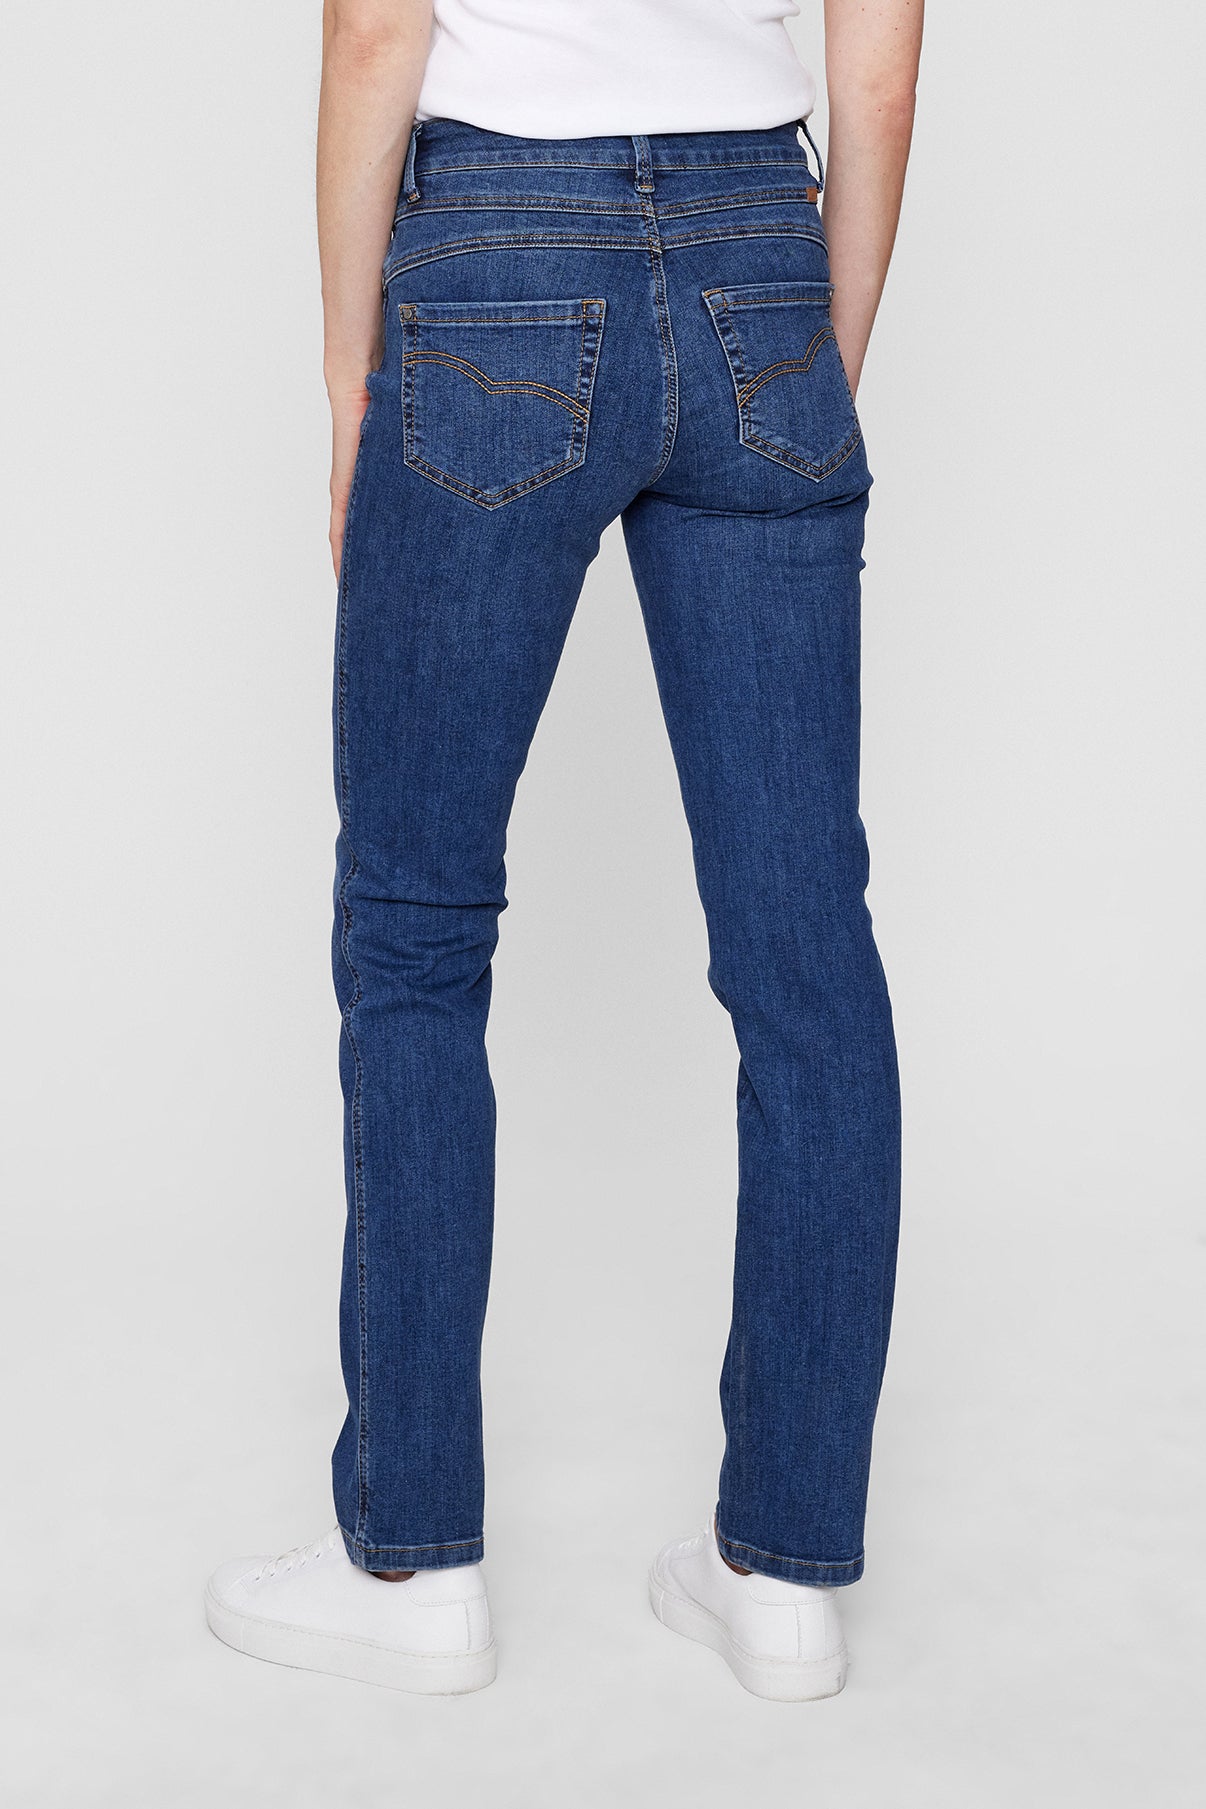 THERESE Jeans Maryann 9412